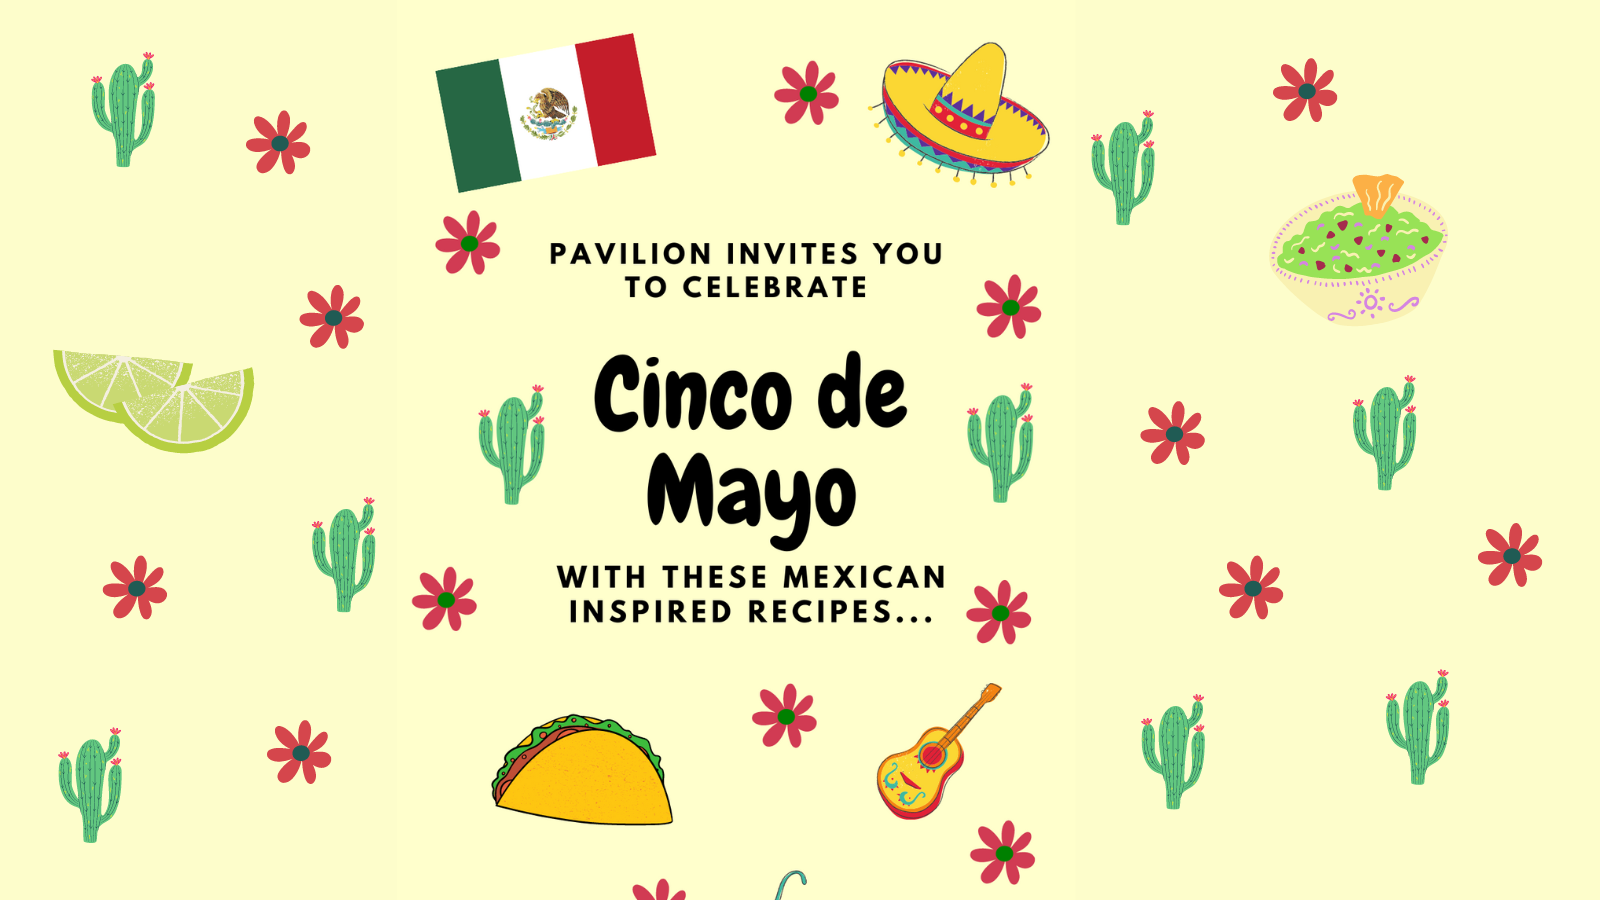 image shows a colourful banner which reads 'Pavilion invites you to celebrate Cinco de Mayo with these Mexican inspired recipes'